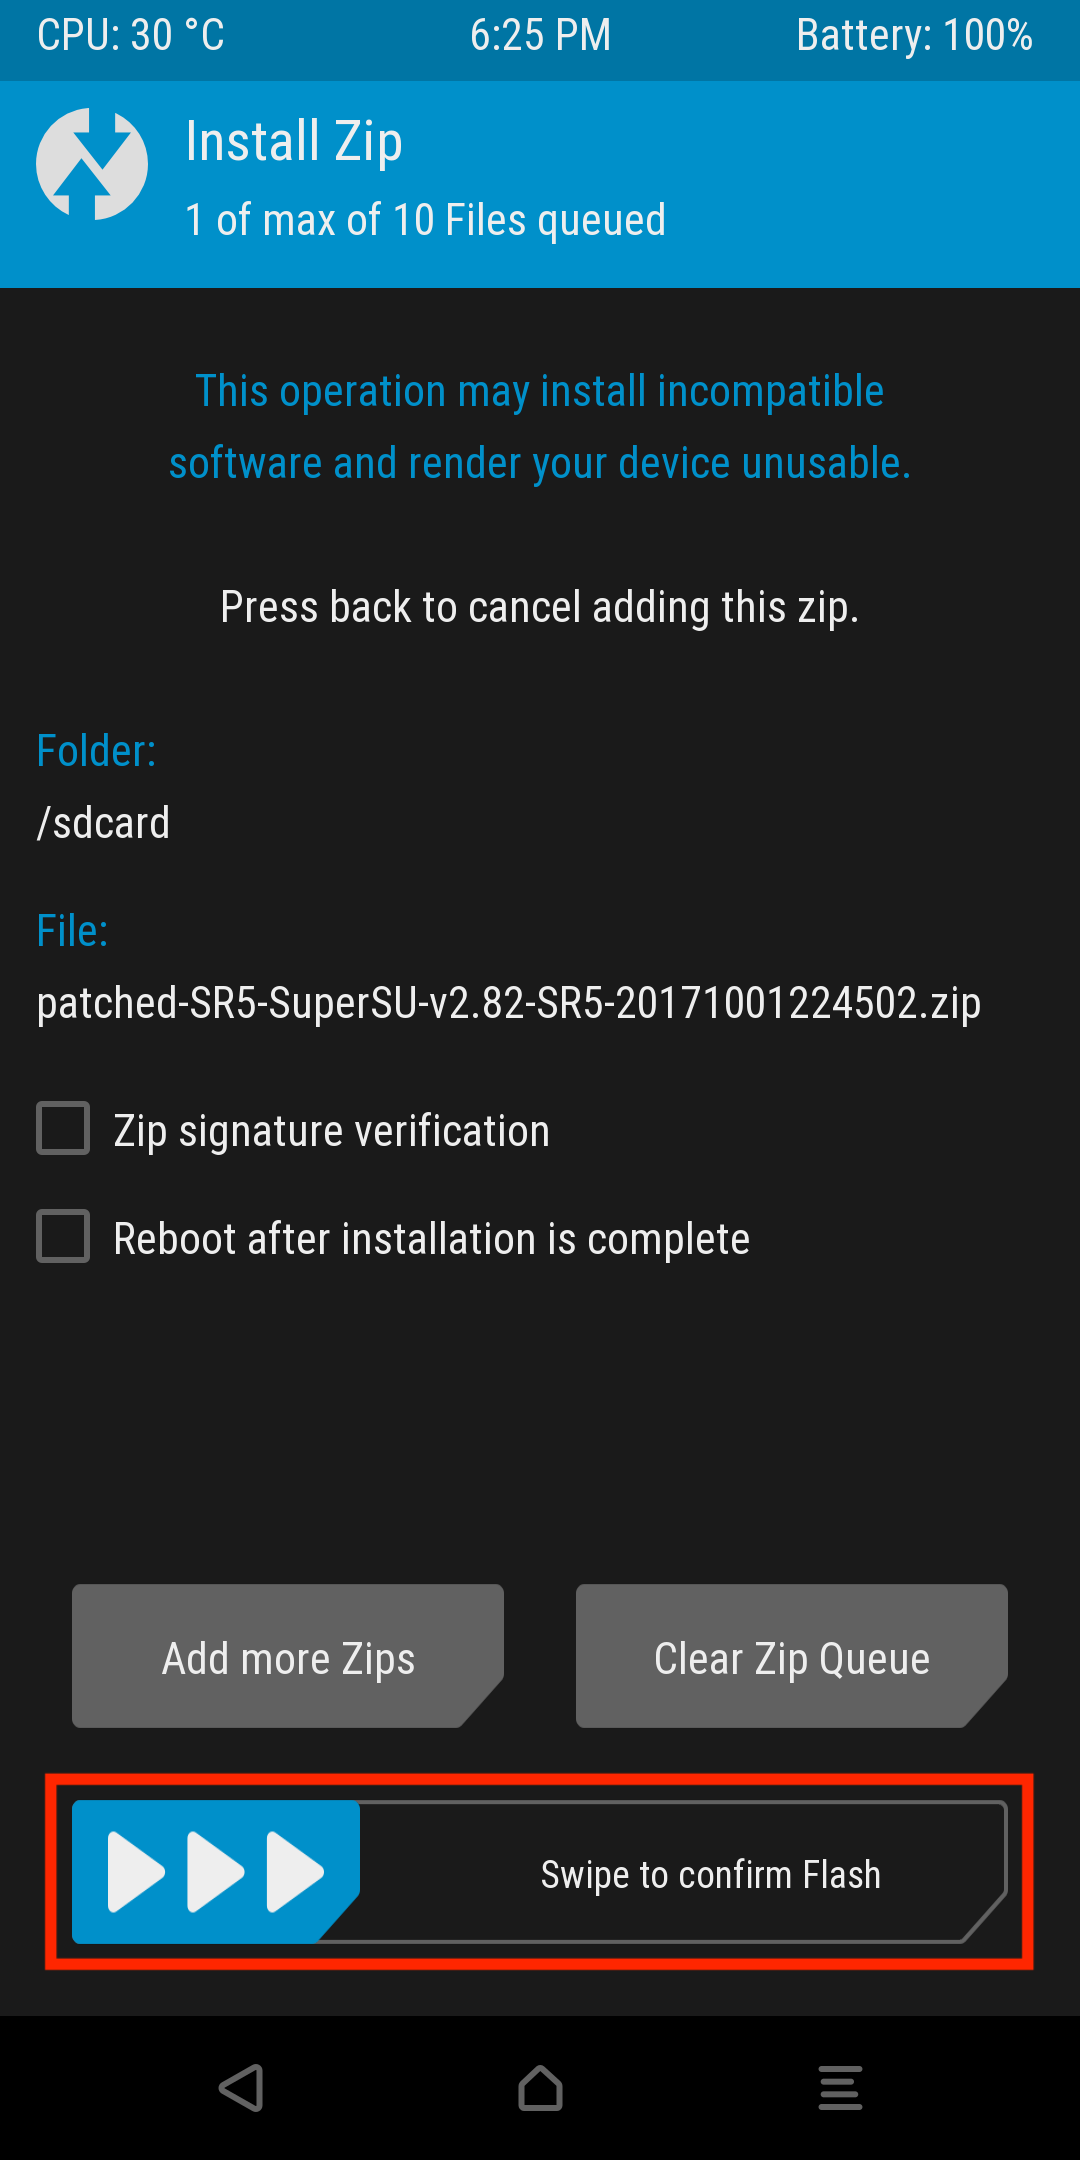 TWRP install confirmation screen